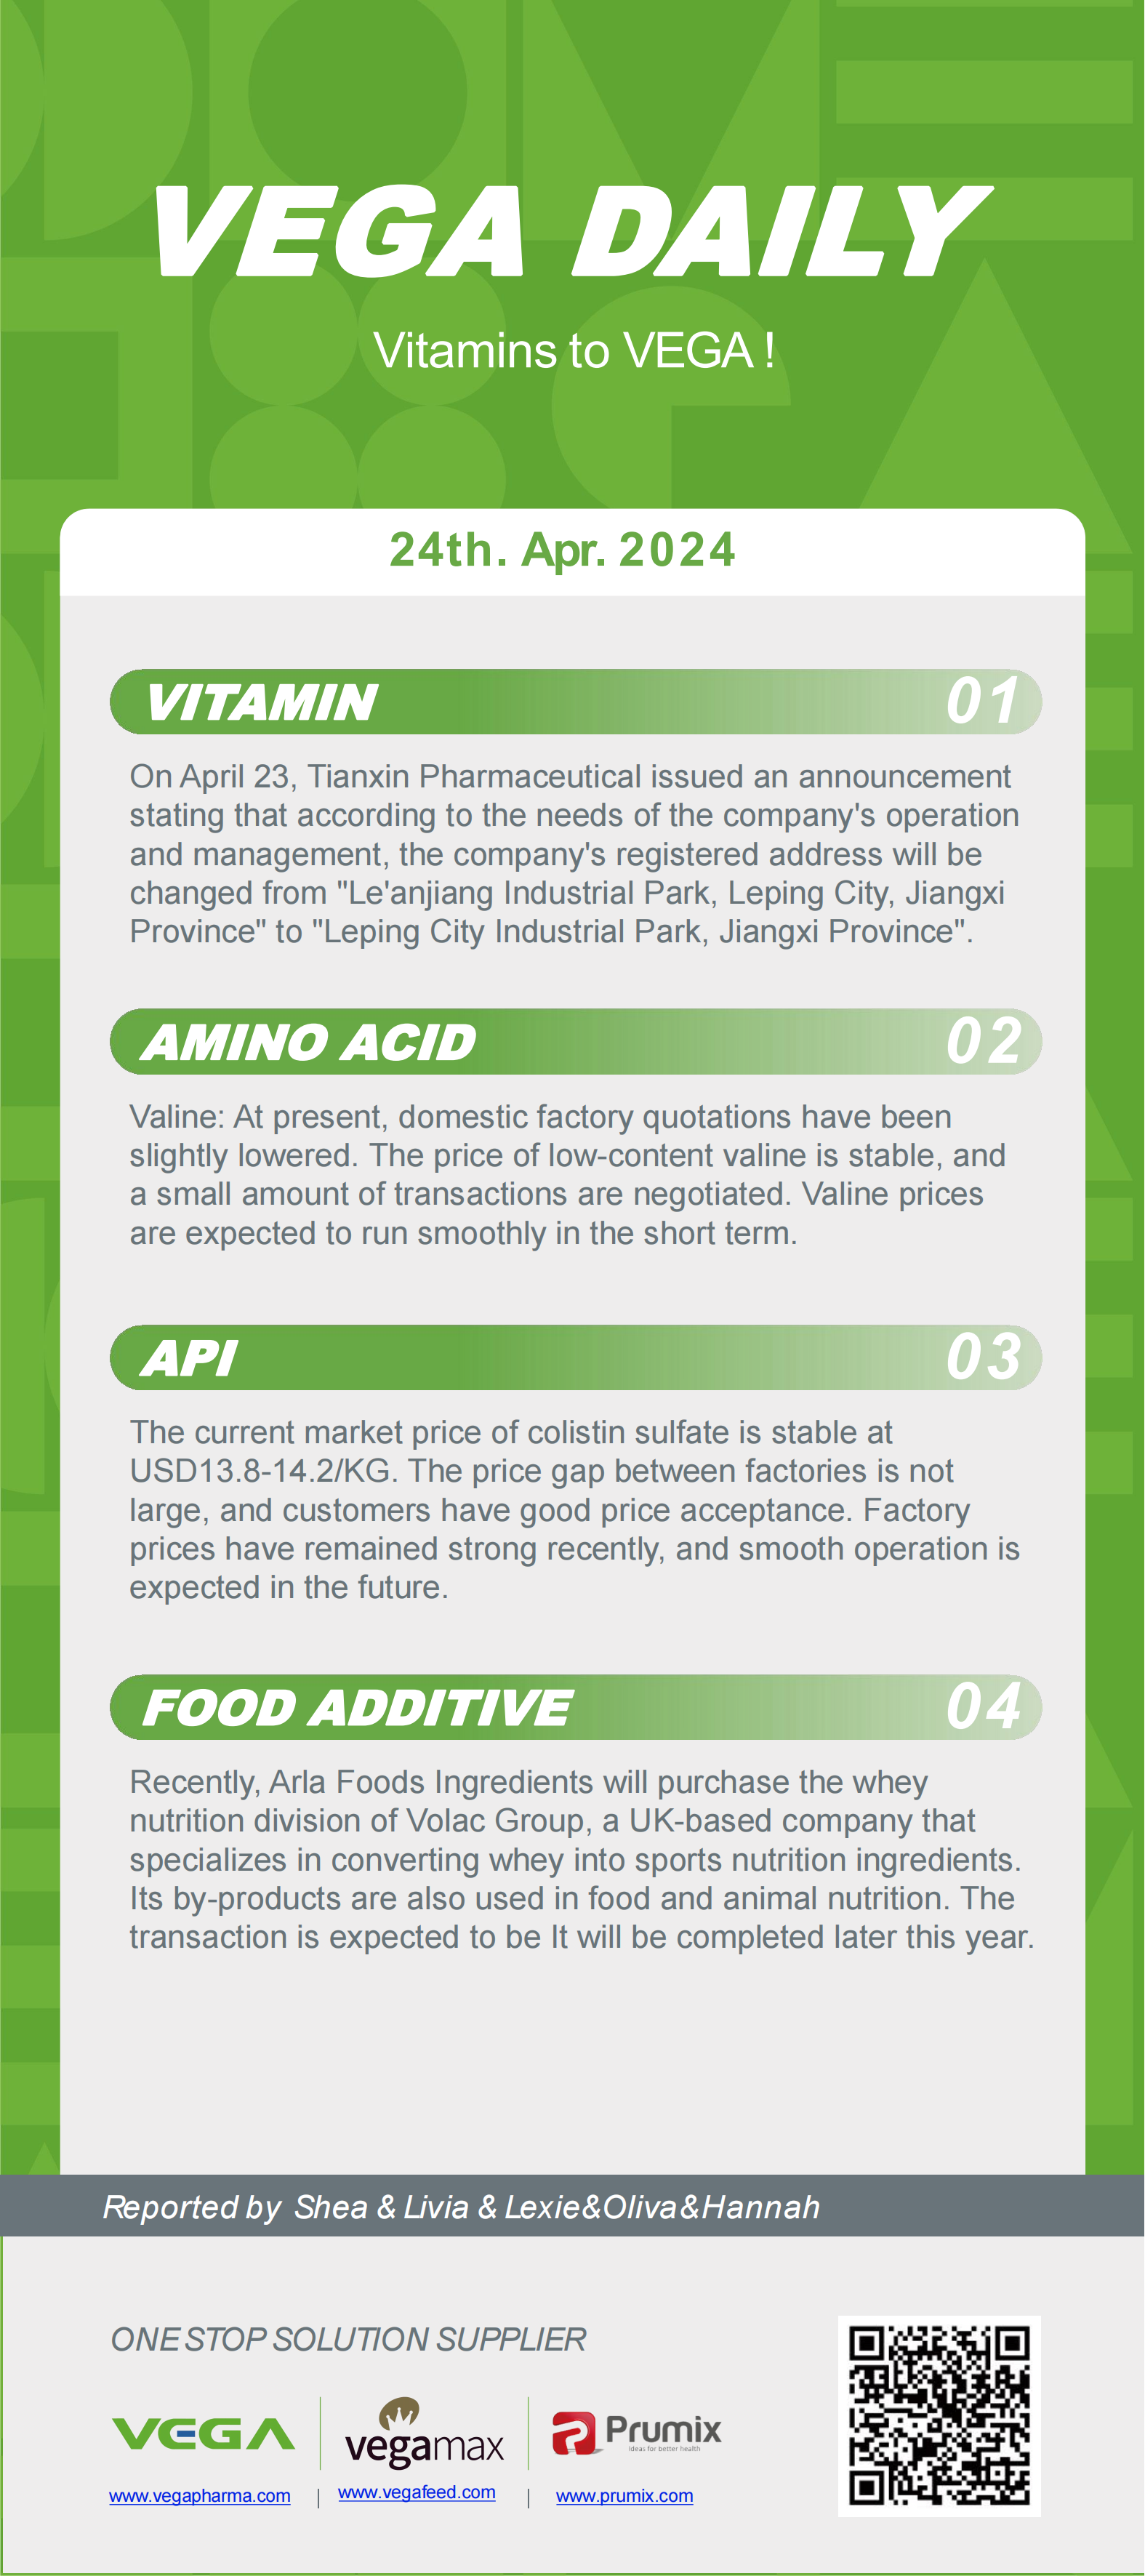 Vega Daily Dated on Apr 24th 2024 Vitamin Amino Acid APl Food Additives.png